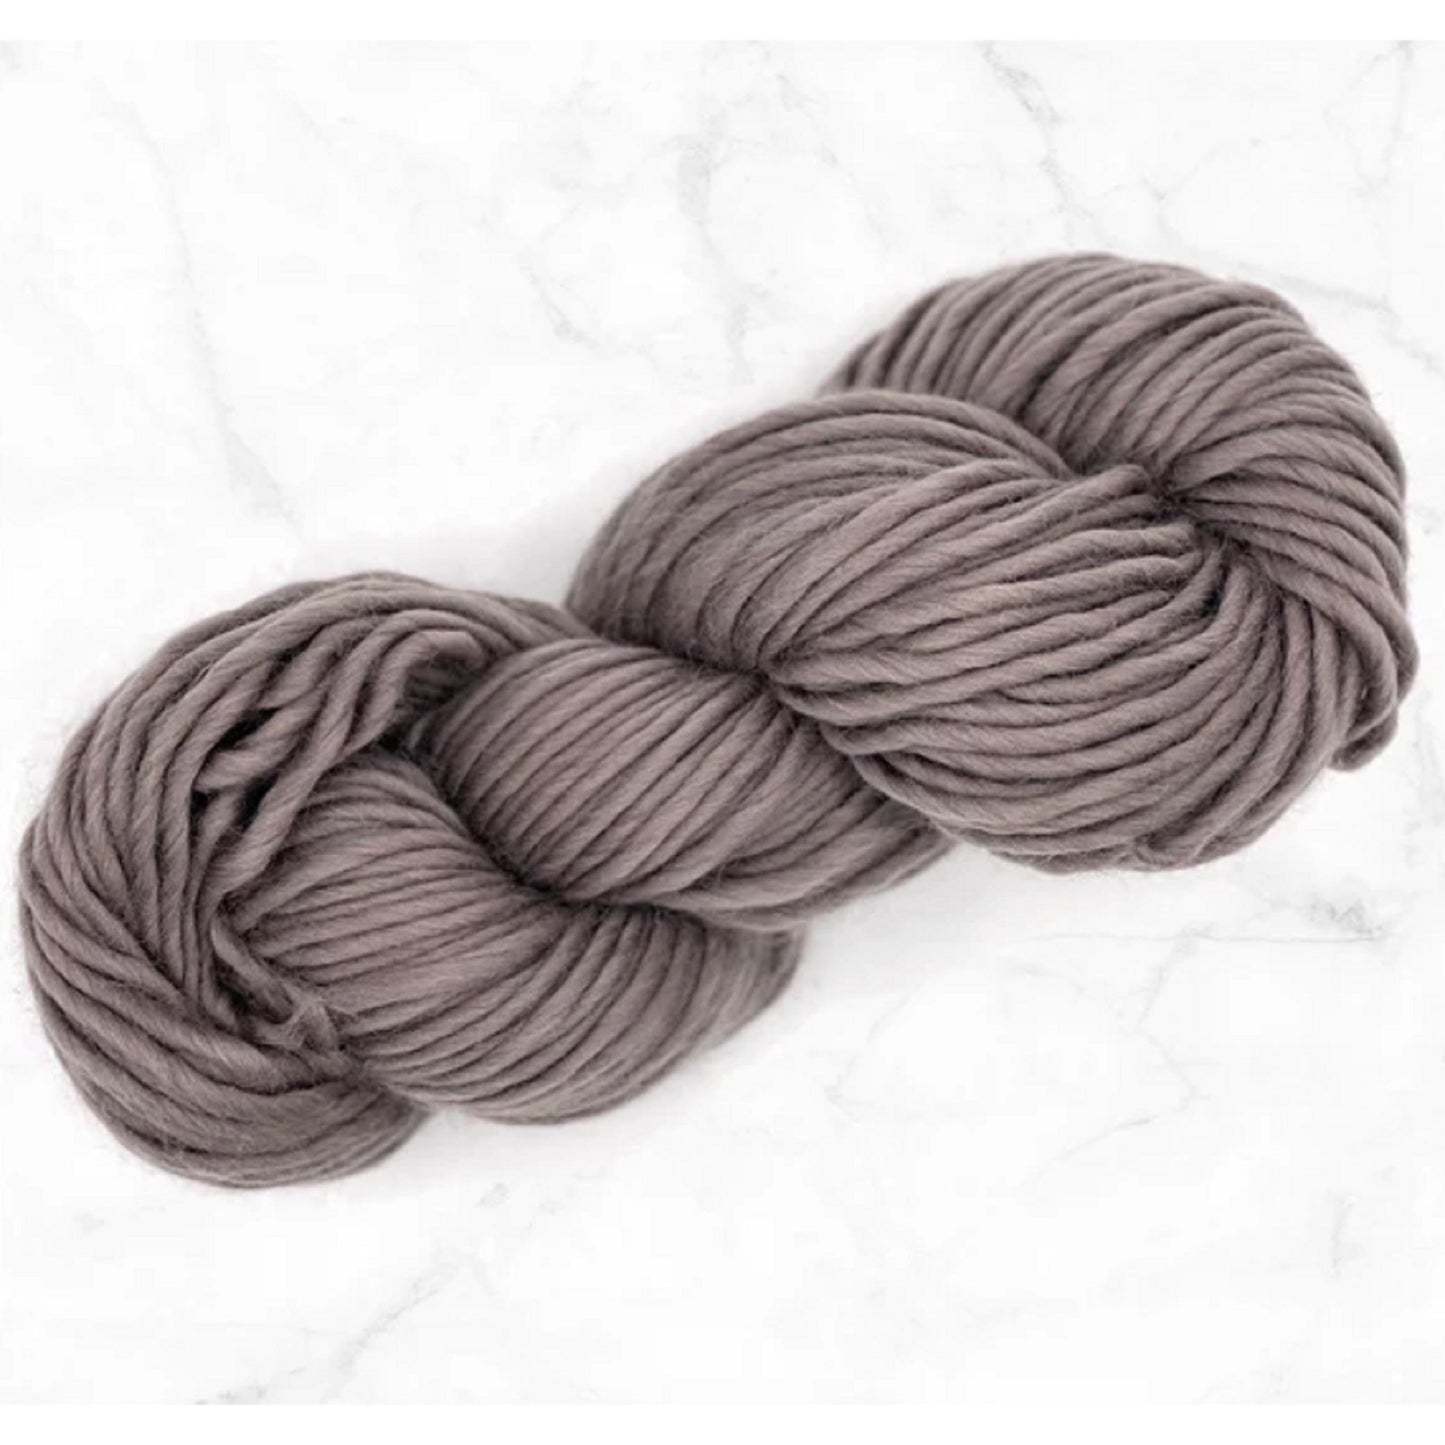 Premium Super Bulky (Chunky) Weight Solid Color Merino Yarn - Textile Indie 